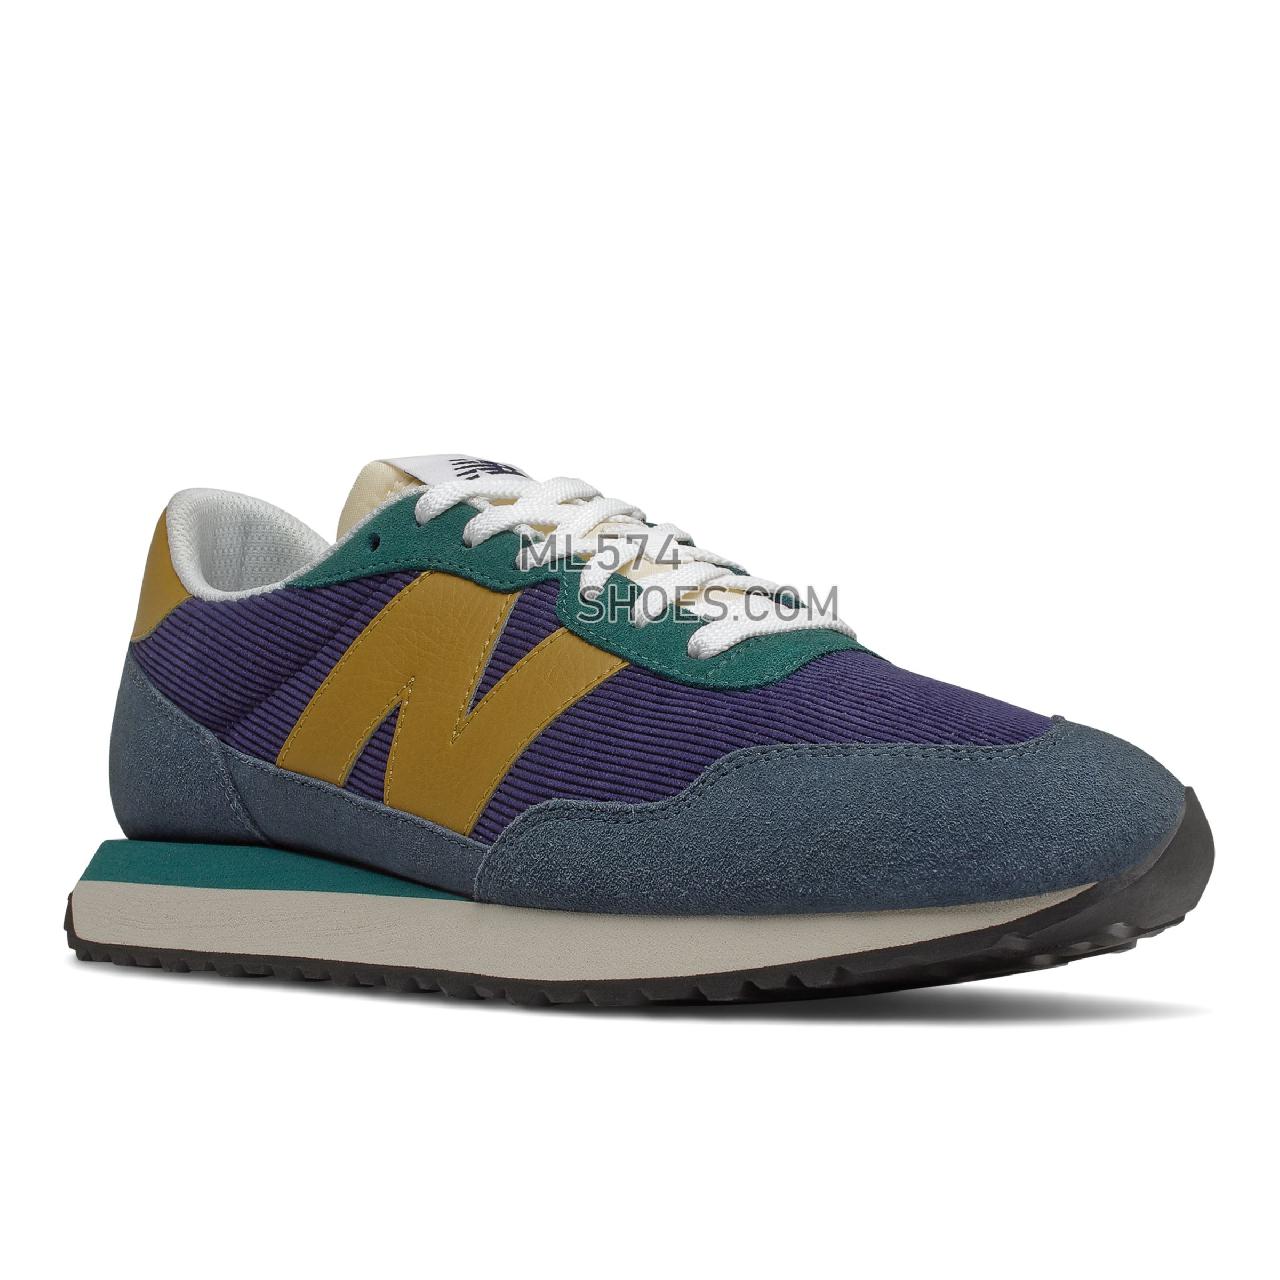 New Balance 237 - Men's Sport Style Sneakers - Mountain Teal with Gold Moss - MS237LX1